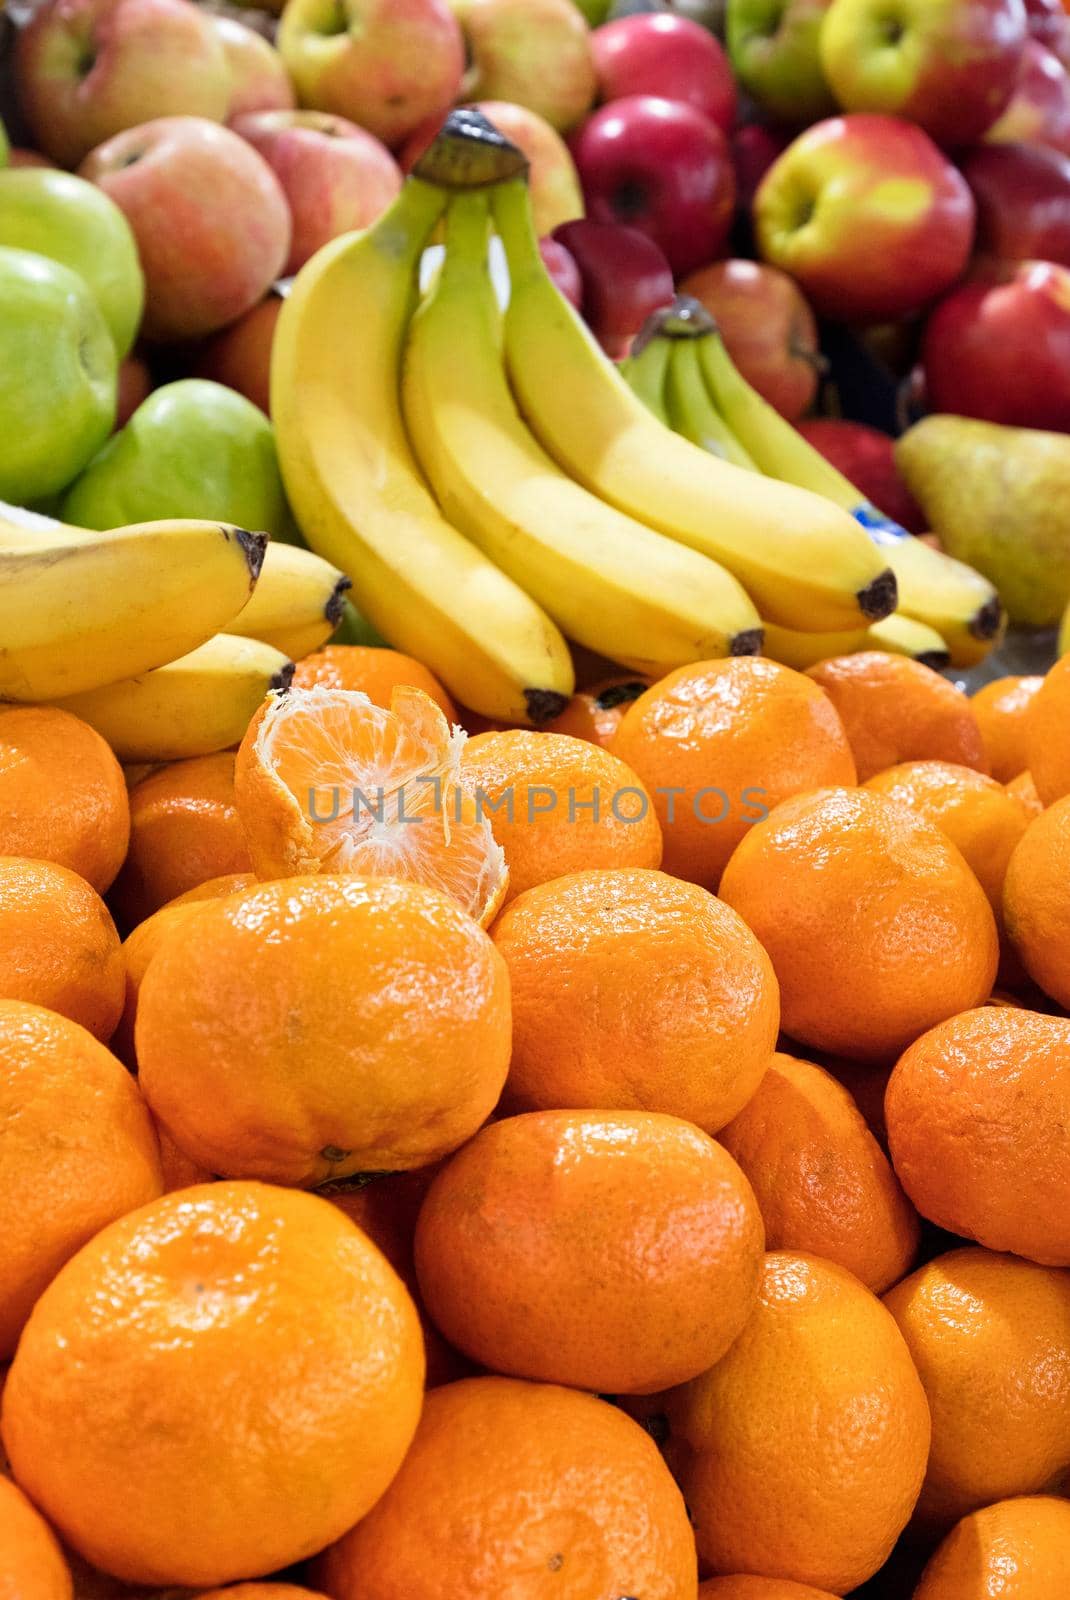 Ripe orange tangerines, bananas and apples lie on the market counter for sale. by Sergii